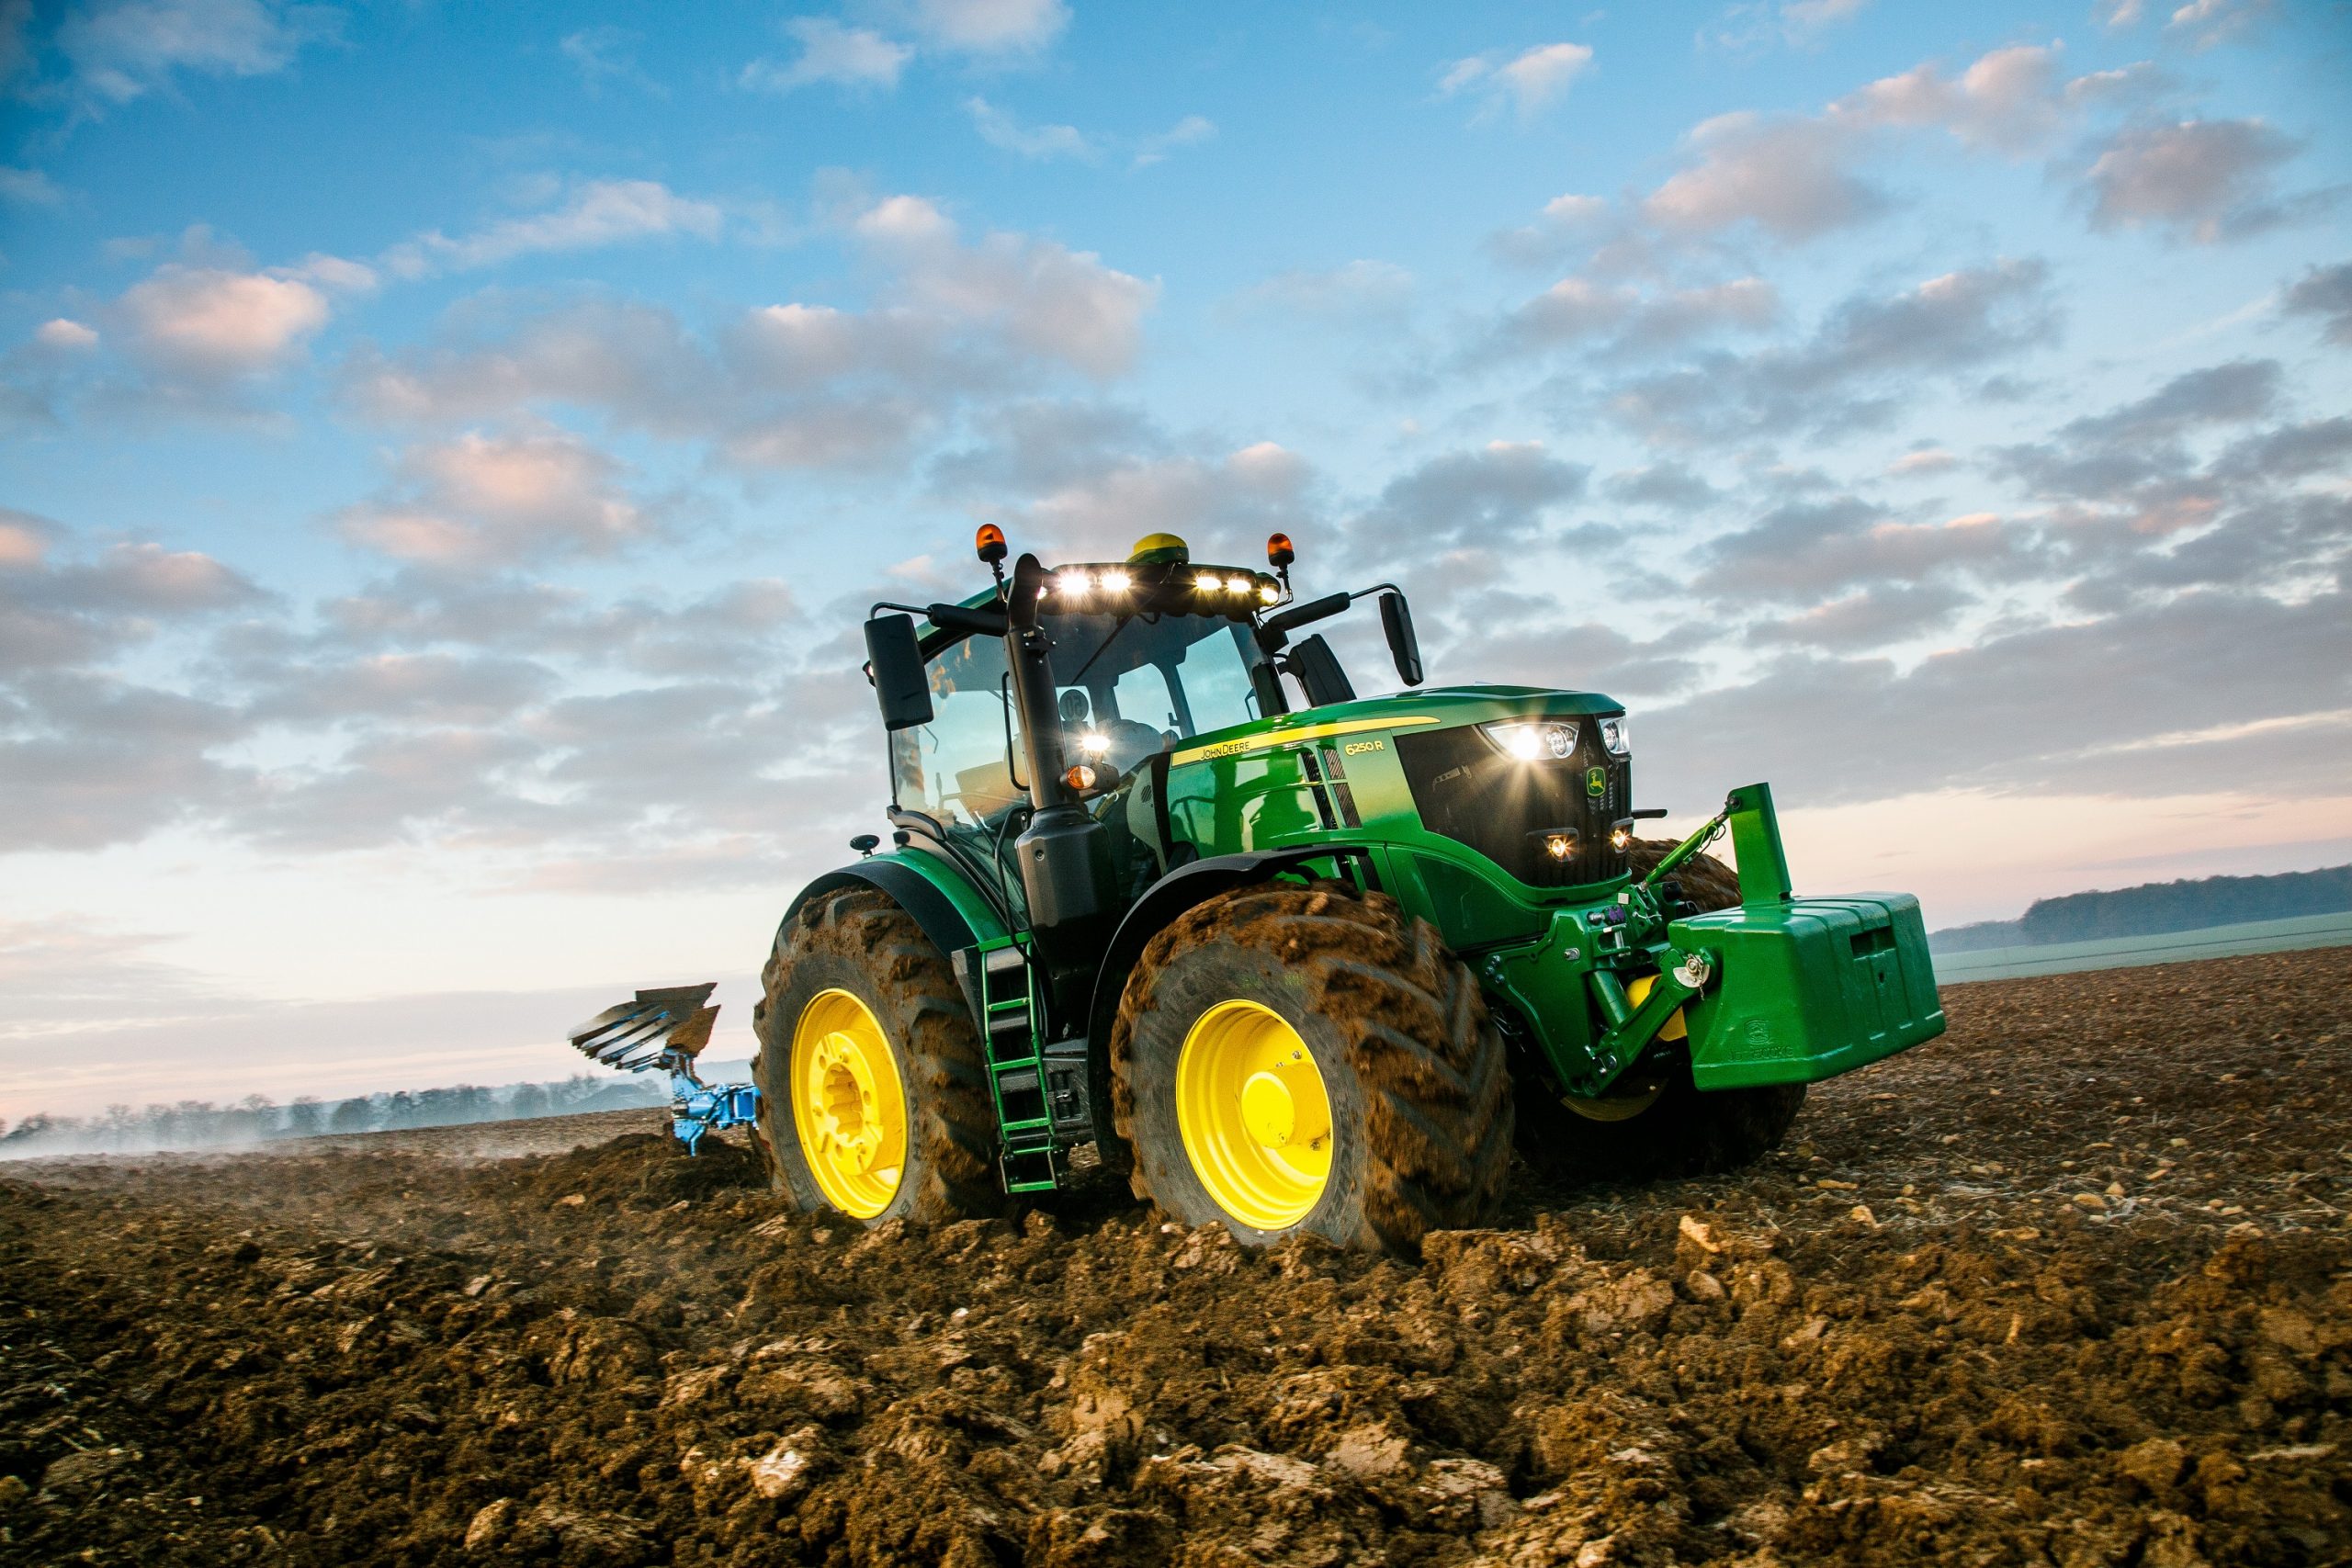 John Deere is becoming a Smart Industrial Company – Wheels and Fields